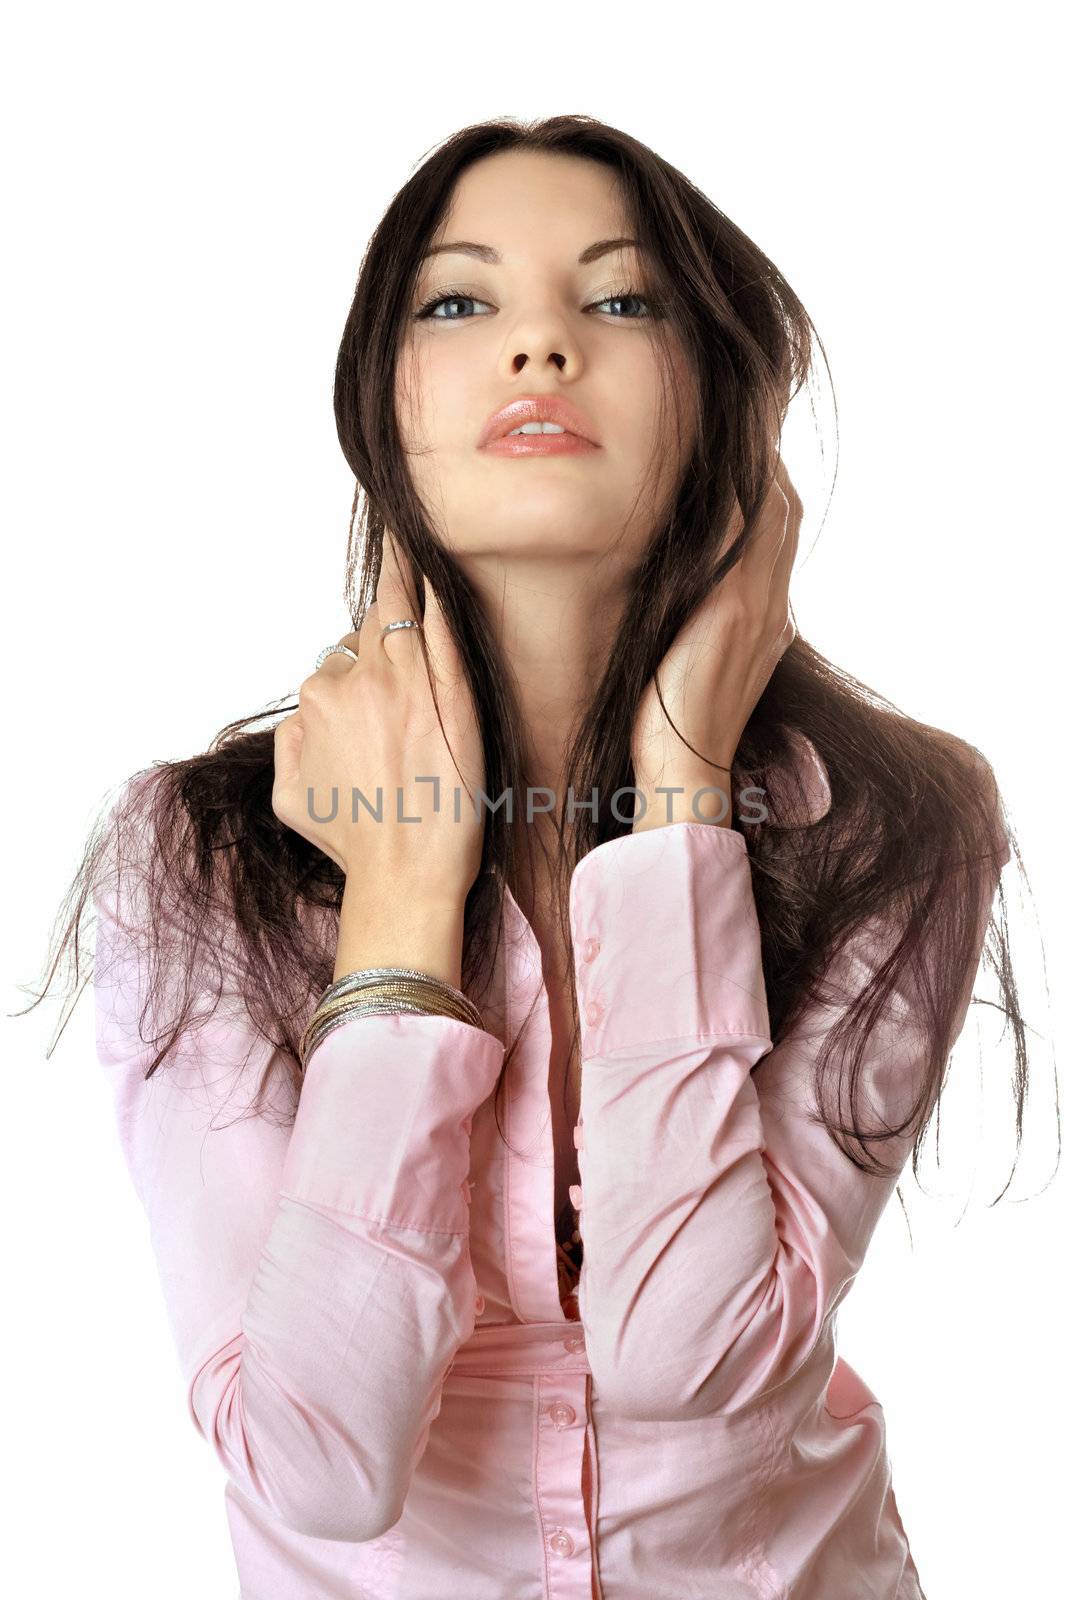 Portrait of pretty young woman in pink shirt. Isolated